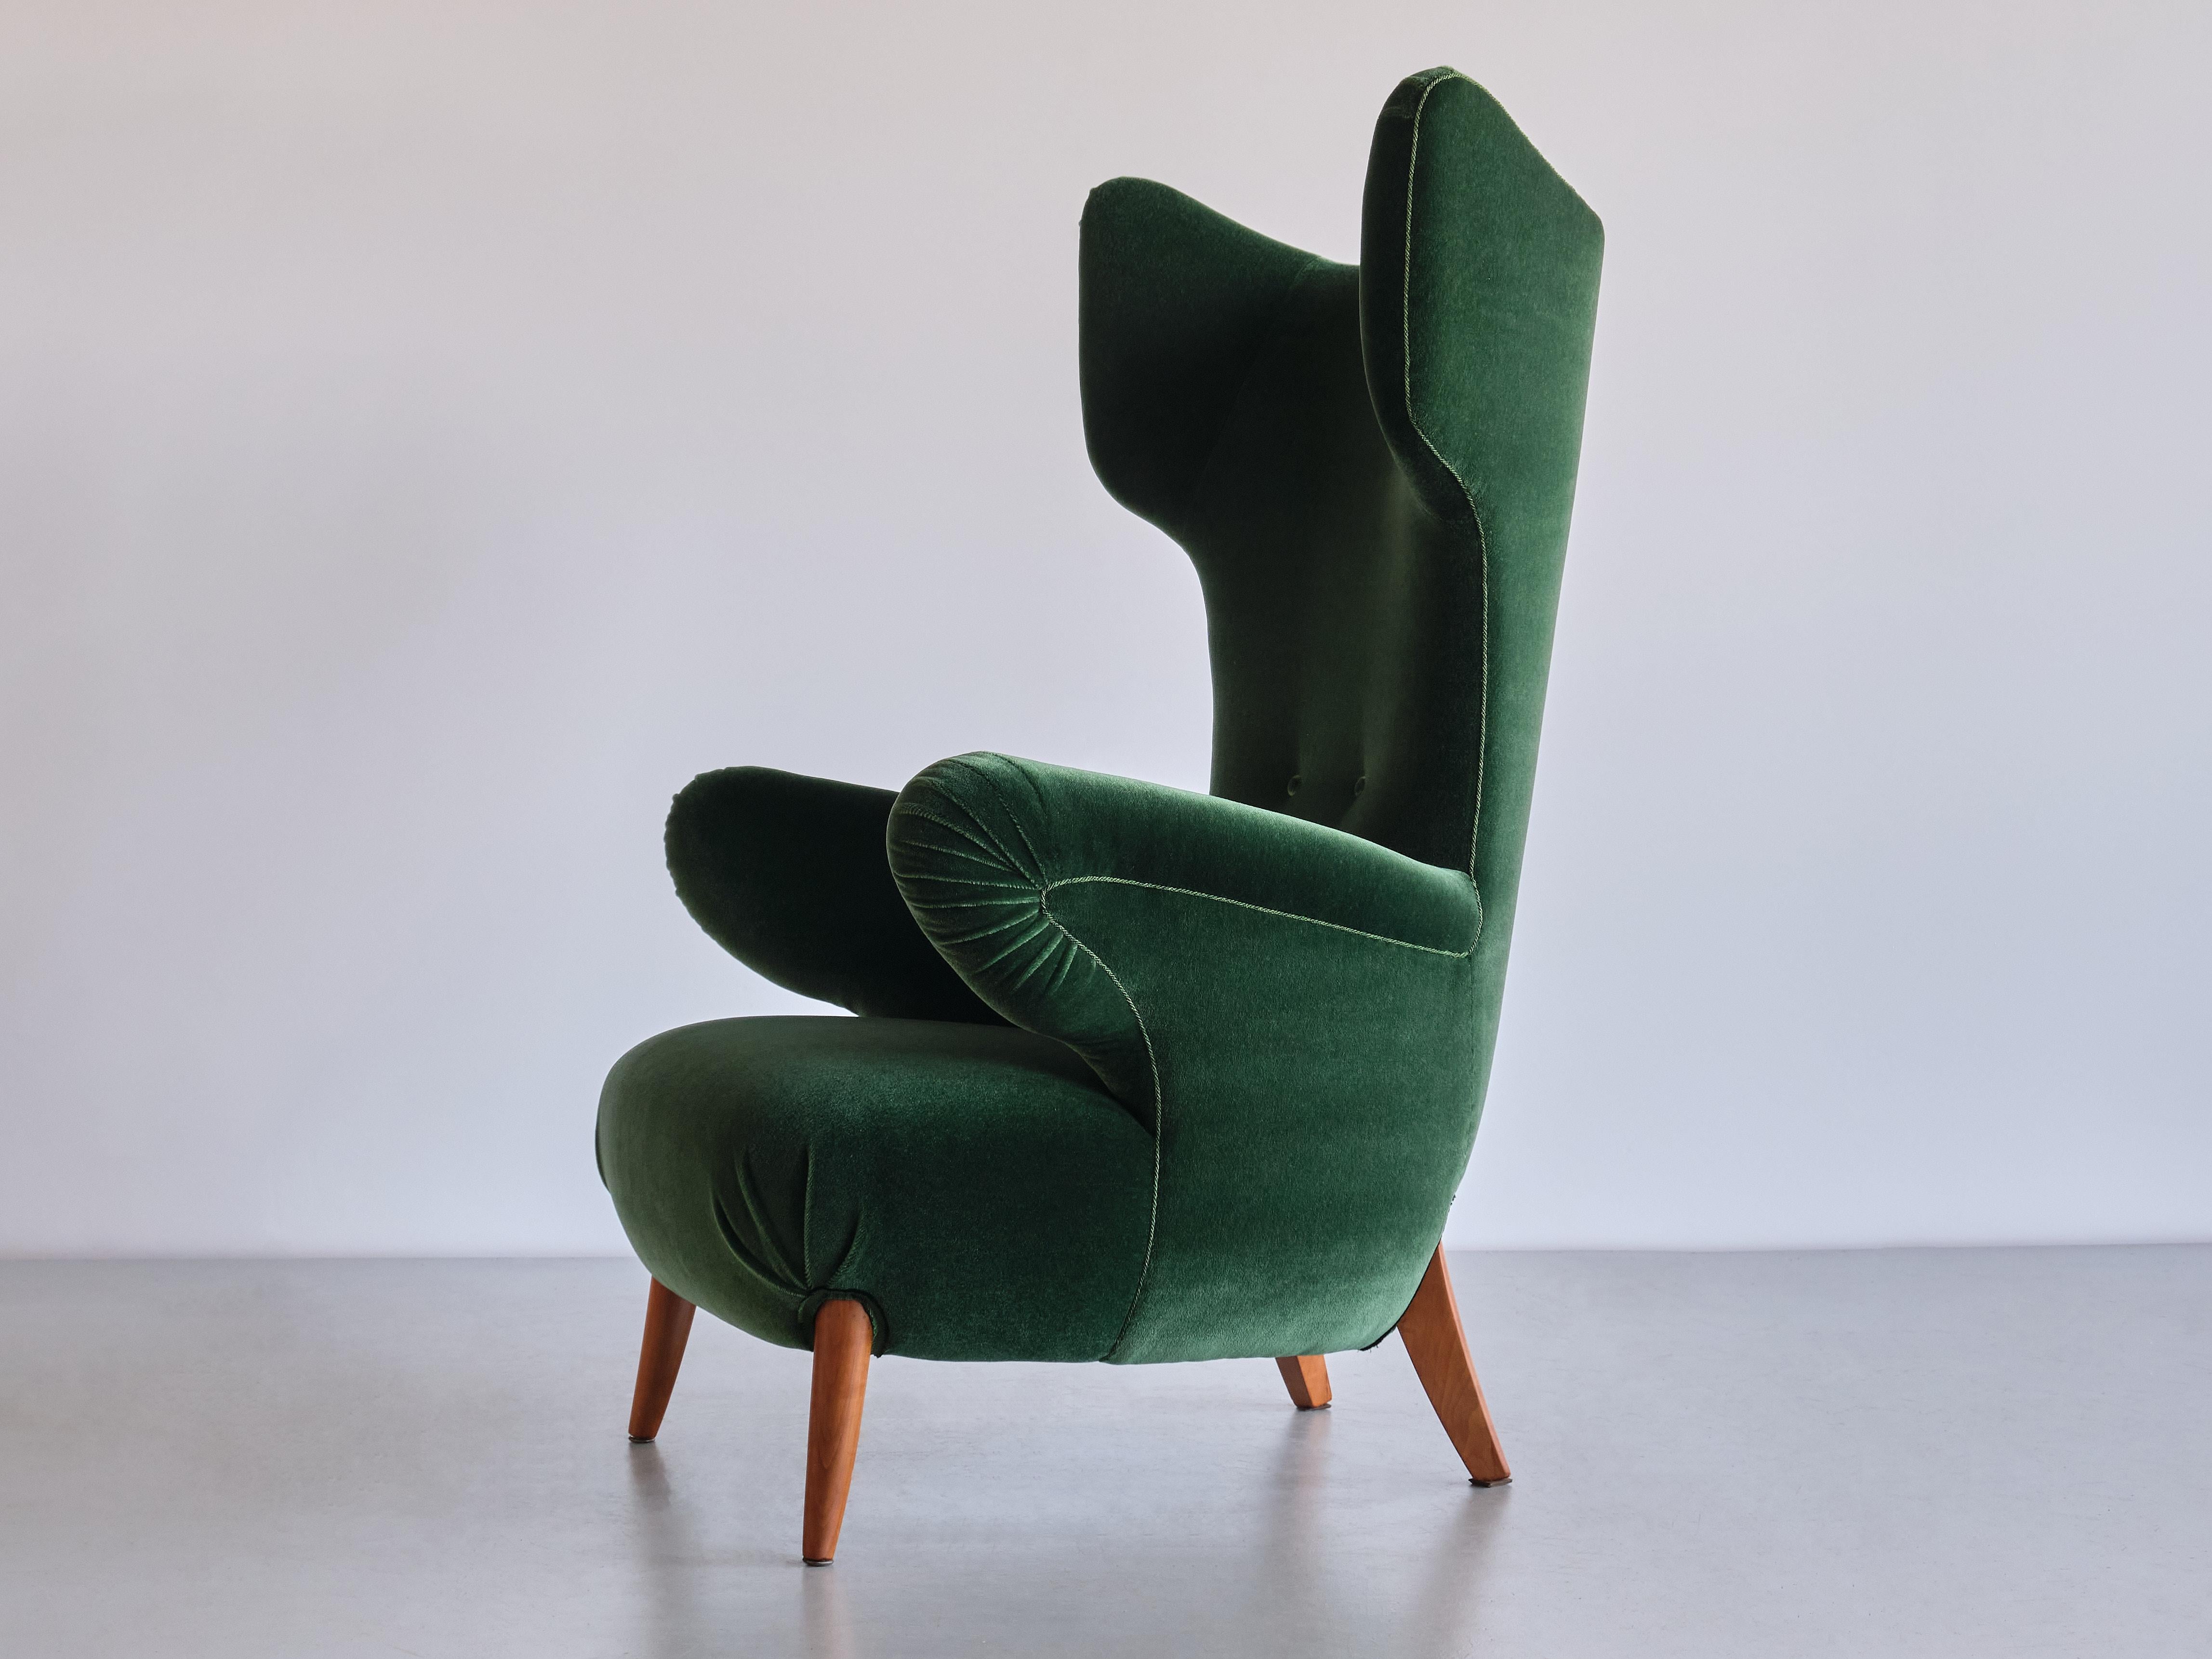 Important Ottorino Aloisio Wingback Chair in Green Mohair, Colli, Italy, 1957 For Sale 3